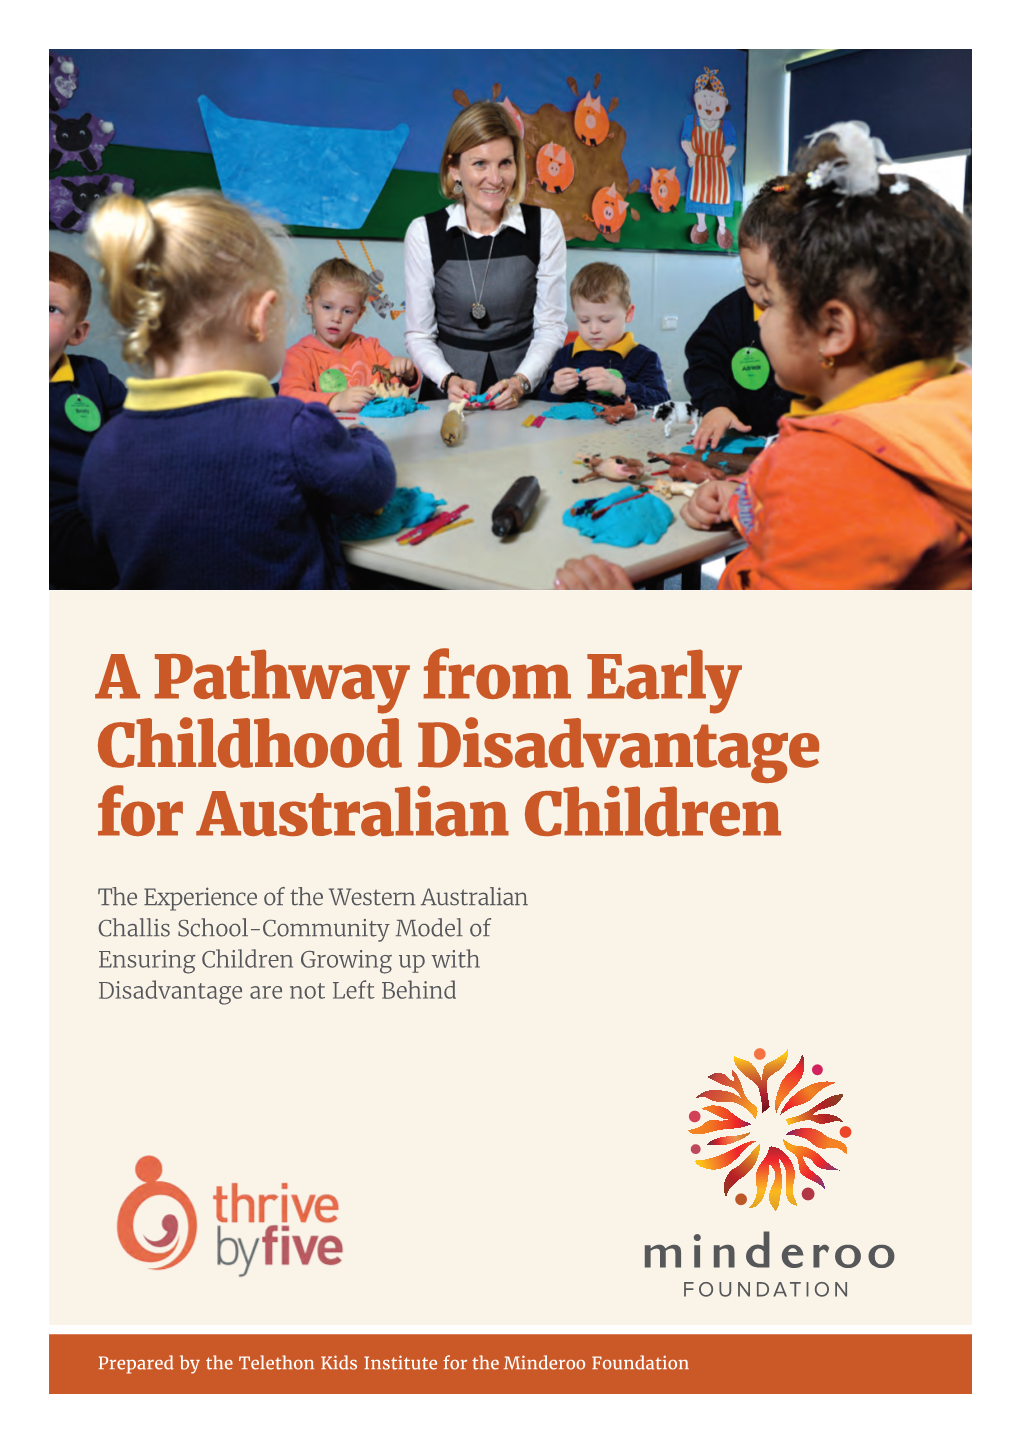 A Pathway from Early Childhood Disadvantage for Australian Children